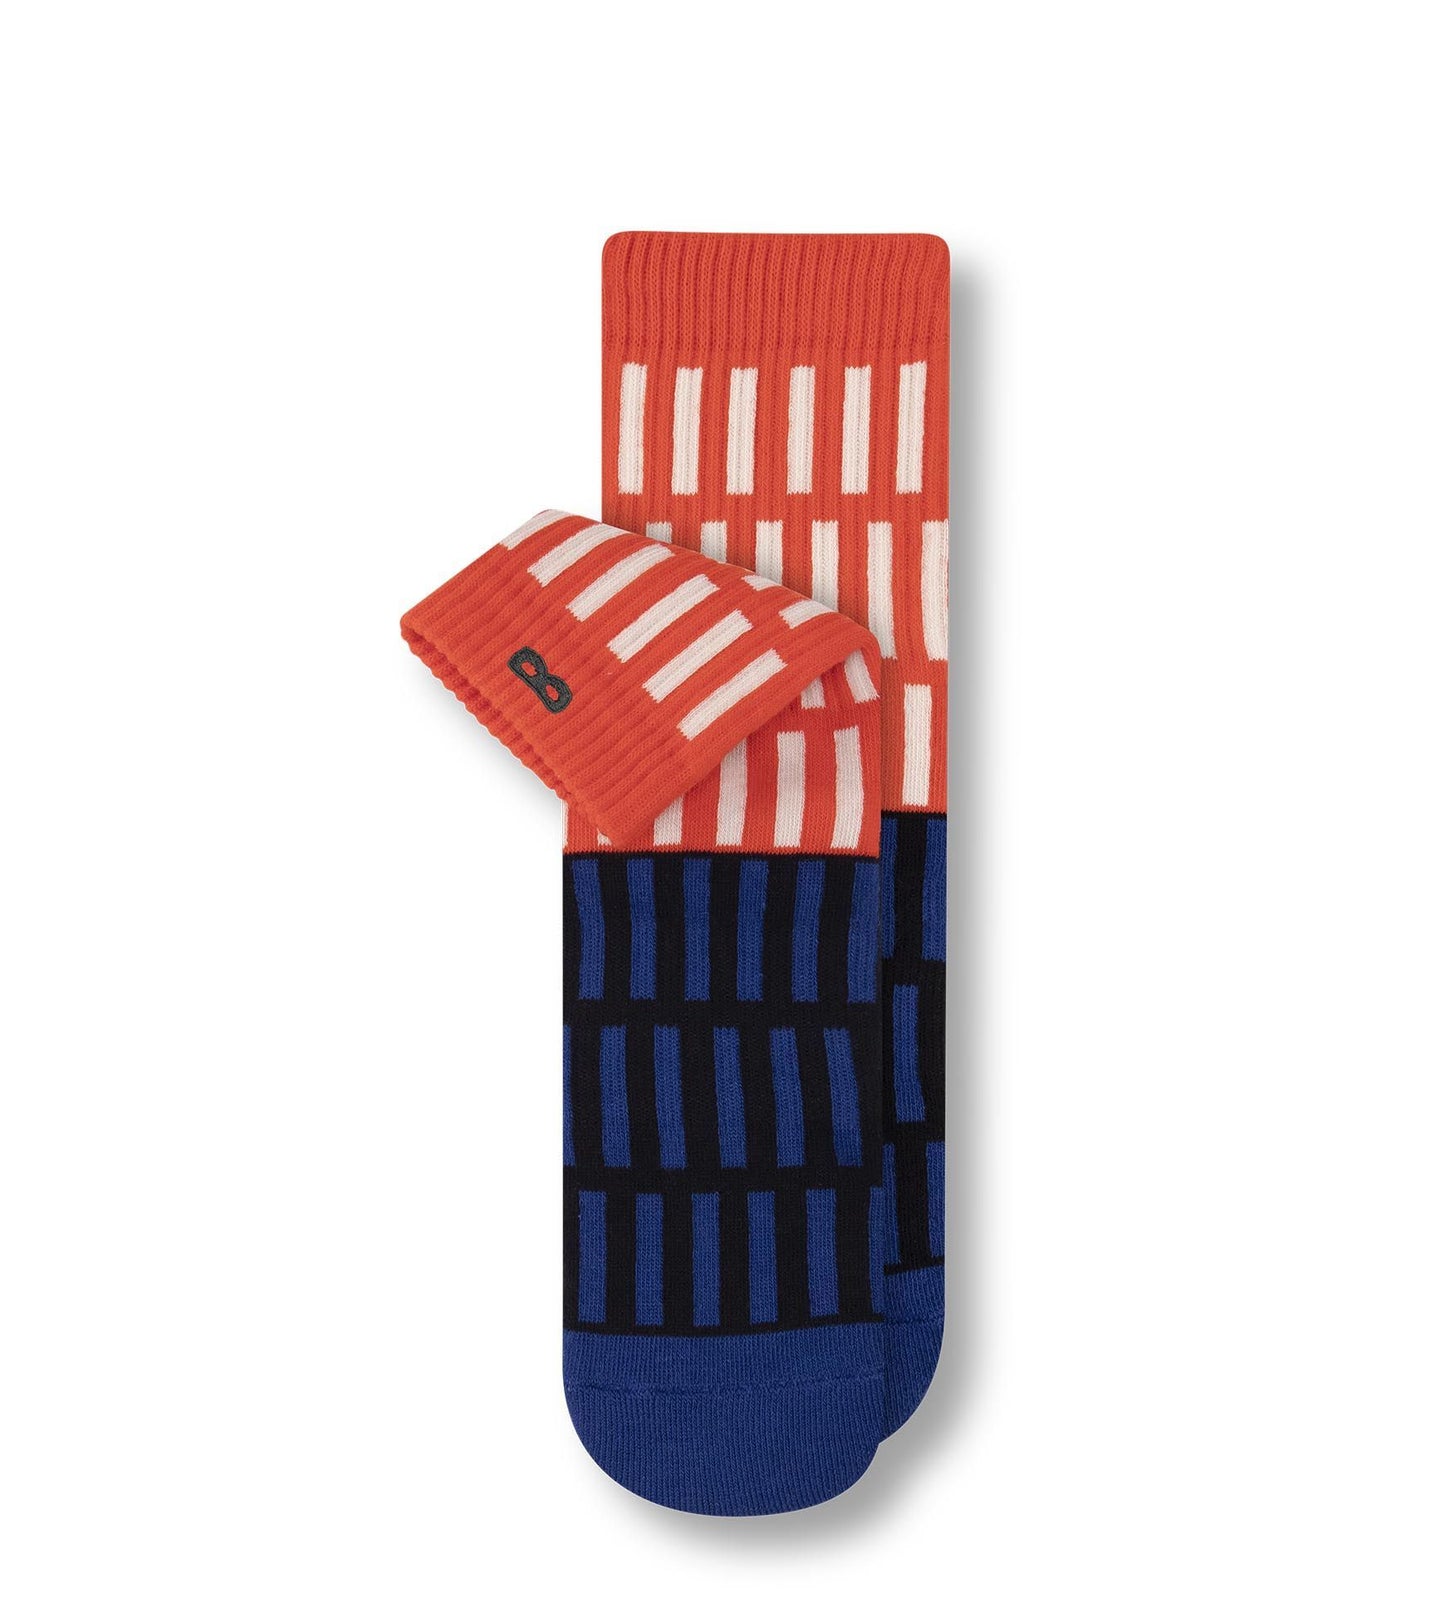 White on Red and Blue on Black Vertical Stripes Write-In Ticket Cushion Ankle Sock